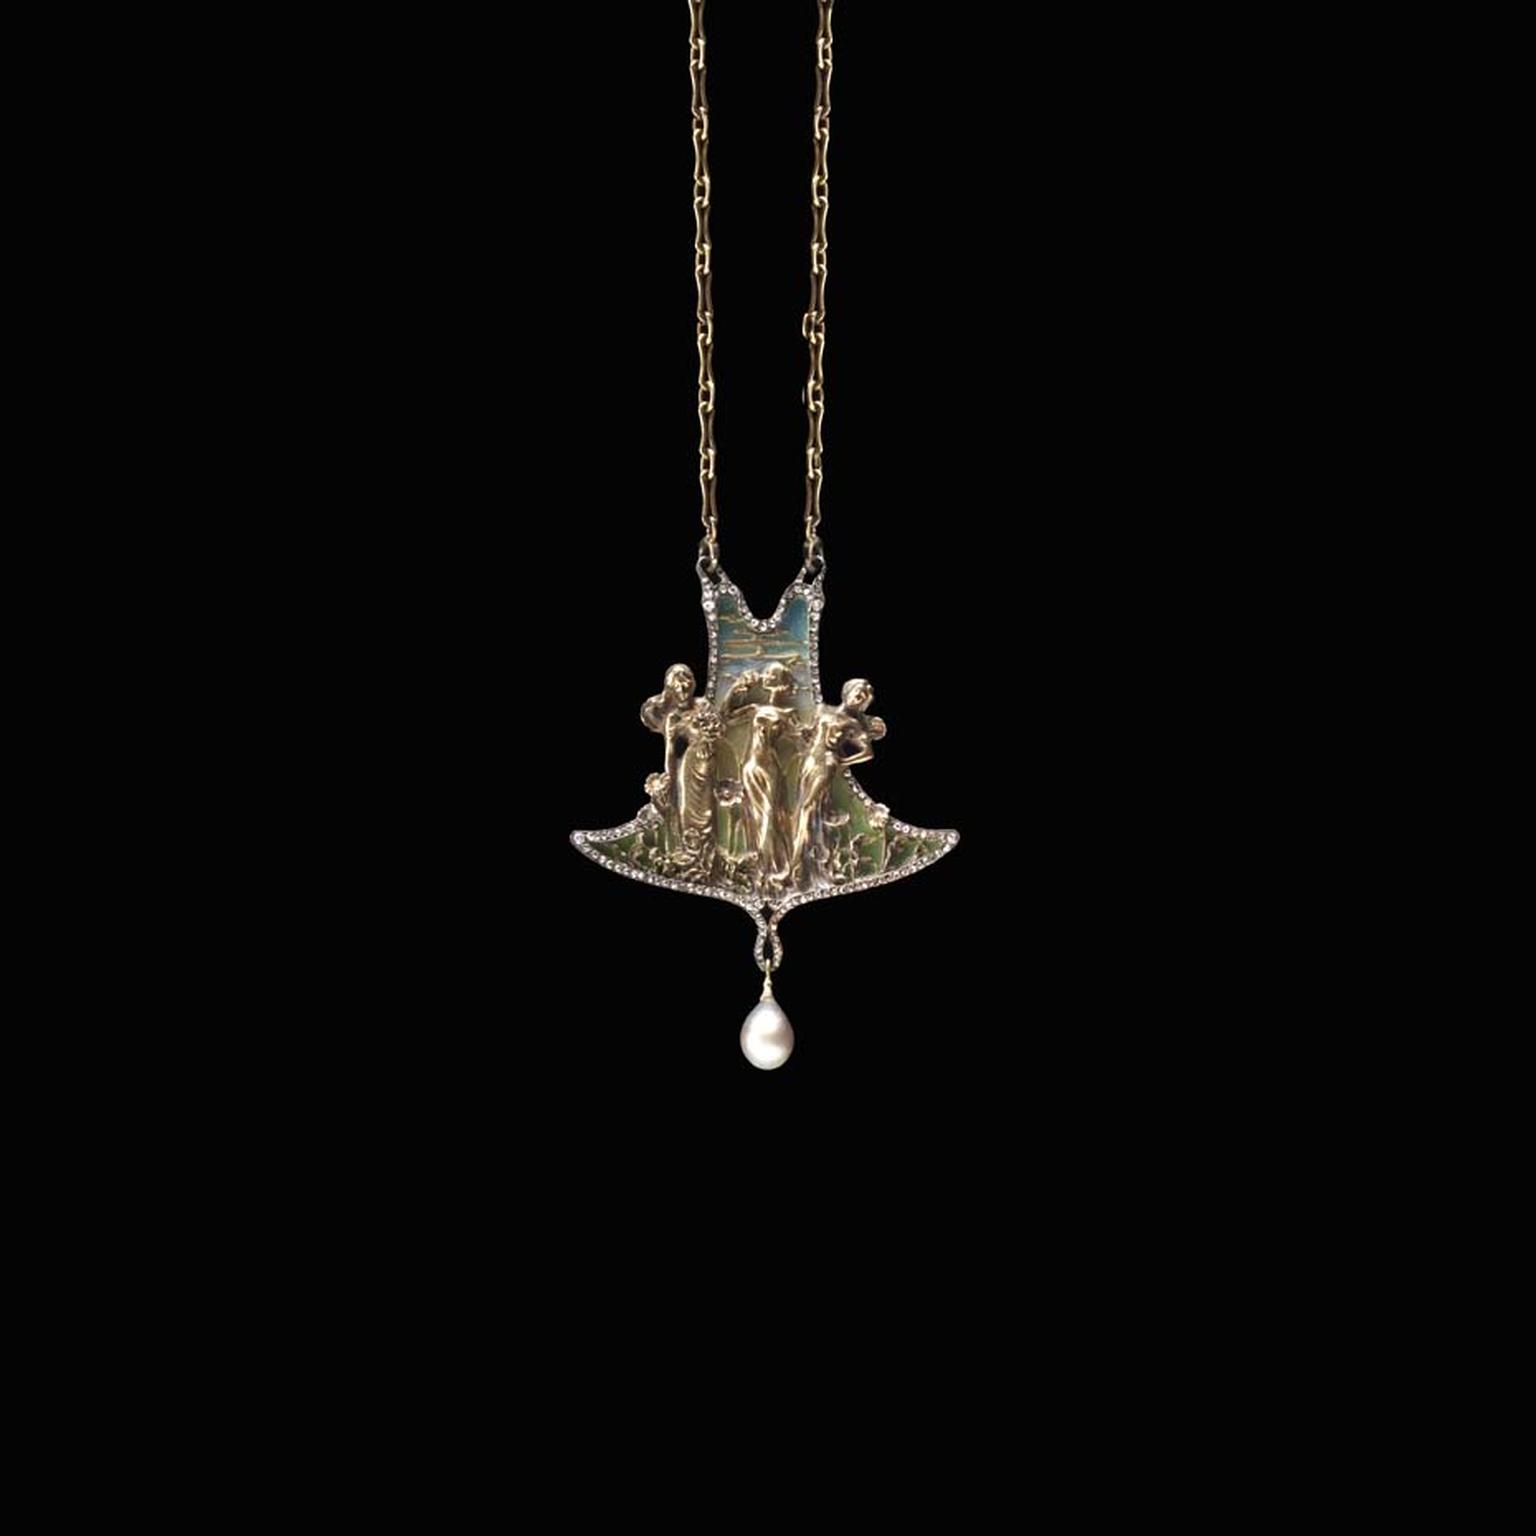 Joë Descomps Three Grace pendant. On display at the Driehaus Museum Maker & Muse exhibition.